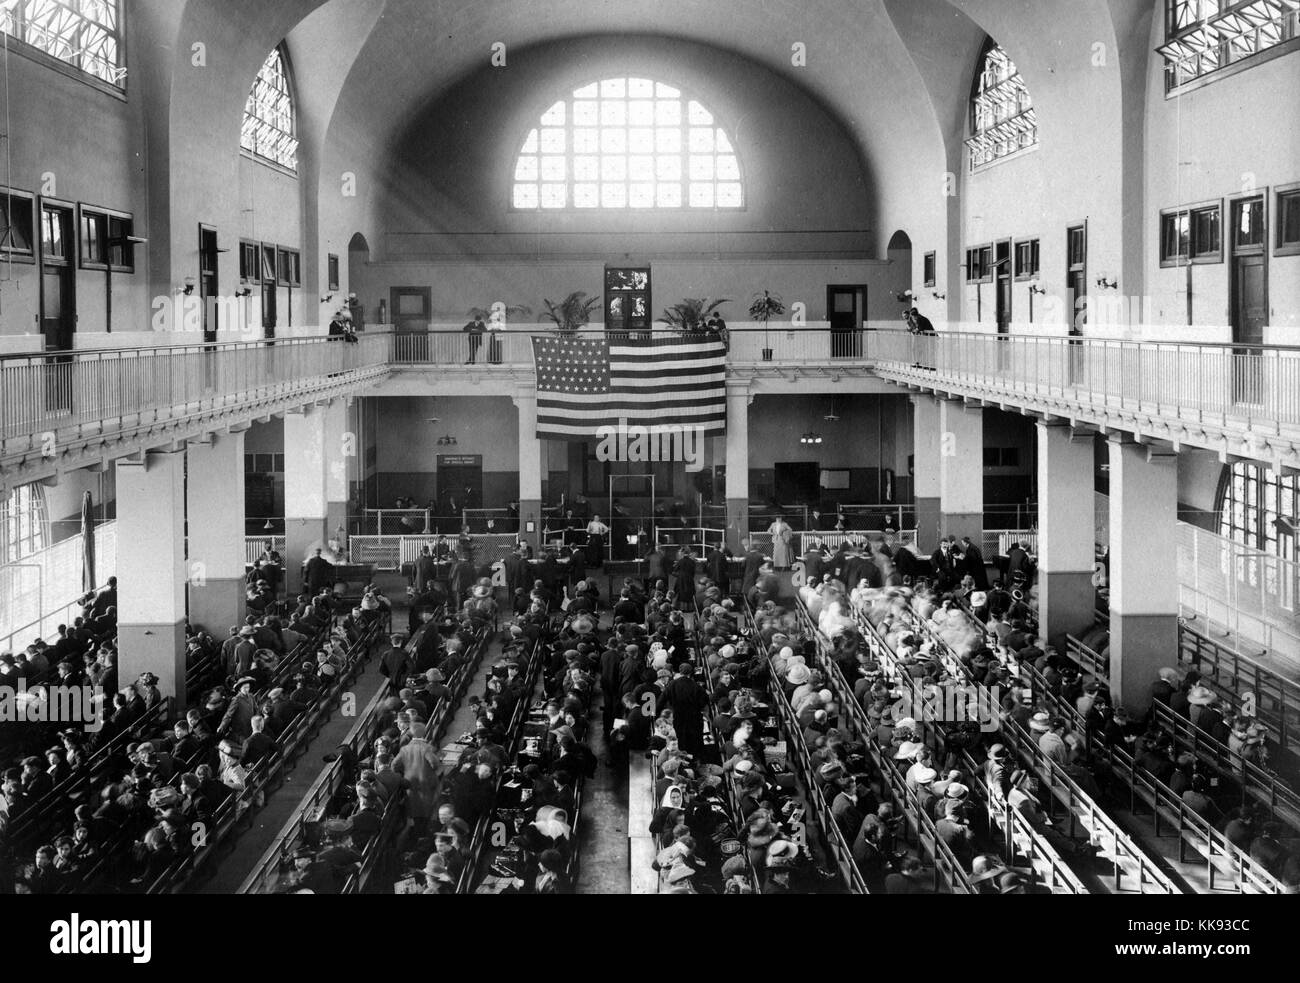 A photograph of the main hall of the United Station immigration inspection station on Ellis Island, immigrants line the benches of the main hall while a few people can be seen looking down at the crowd from the second floor, the American Flag hanging over the main hall displays 46 stars, Ellis Island was the busiest point of immigration in the United States from 1892 until it closed in 1954 after processing over 12 million immigrants, New York, 1907. From the New York Public Library. Stock Photo